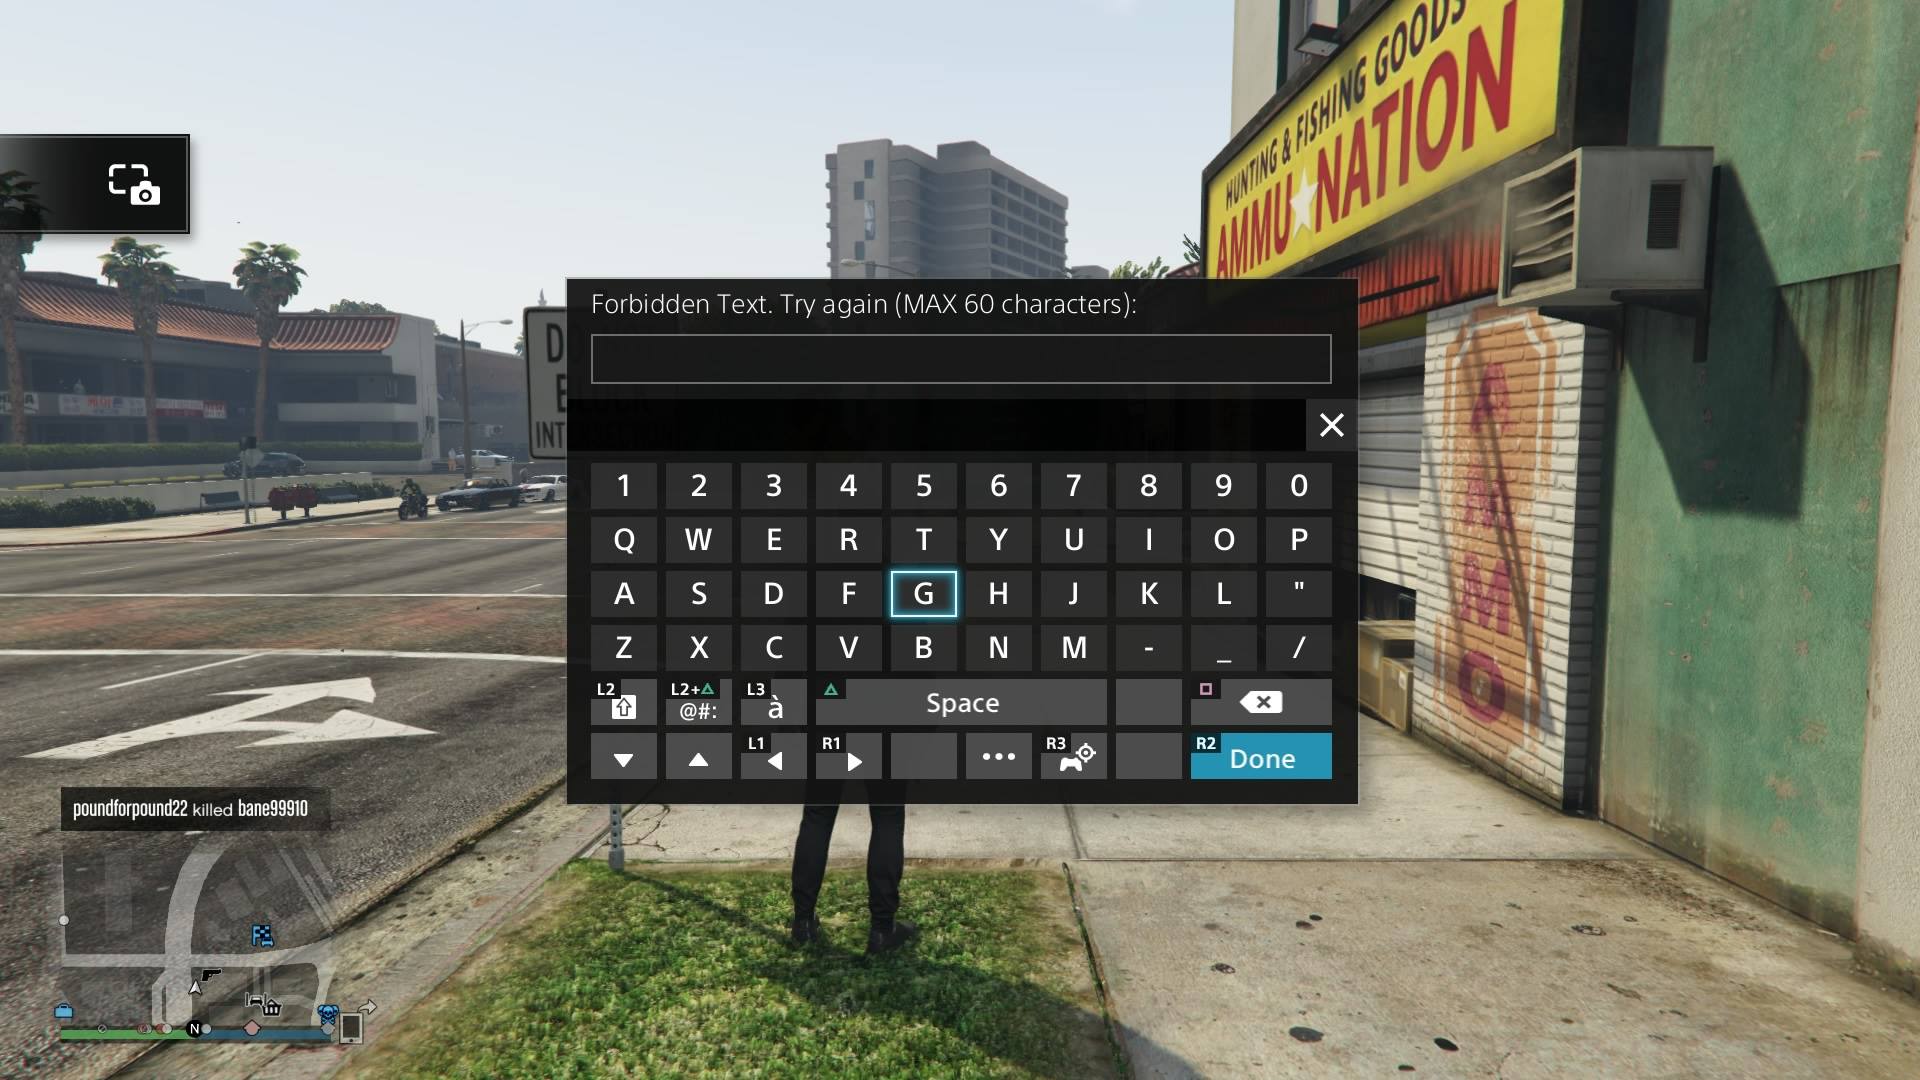 Nintendo, And Other Banned Words I Can’t Use In Grand Theft Auto